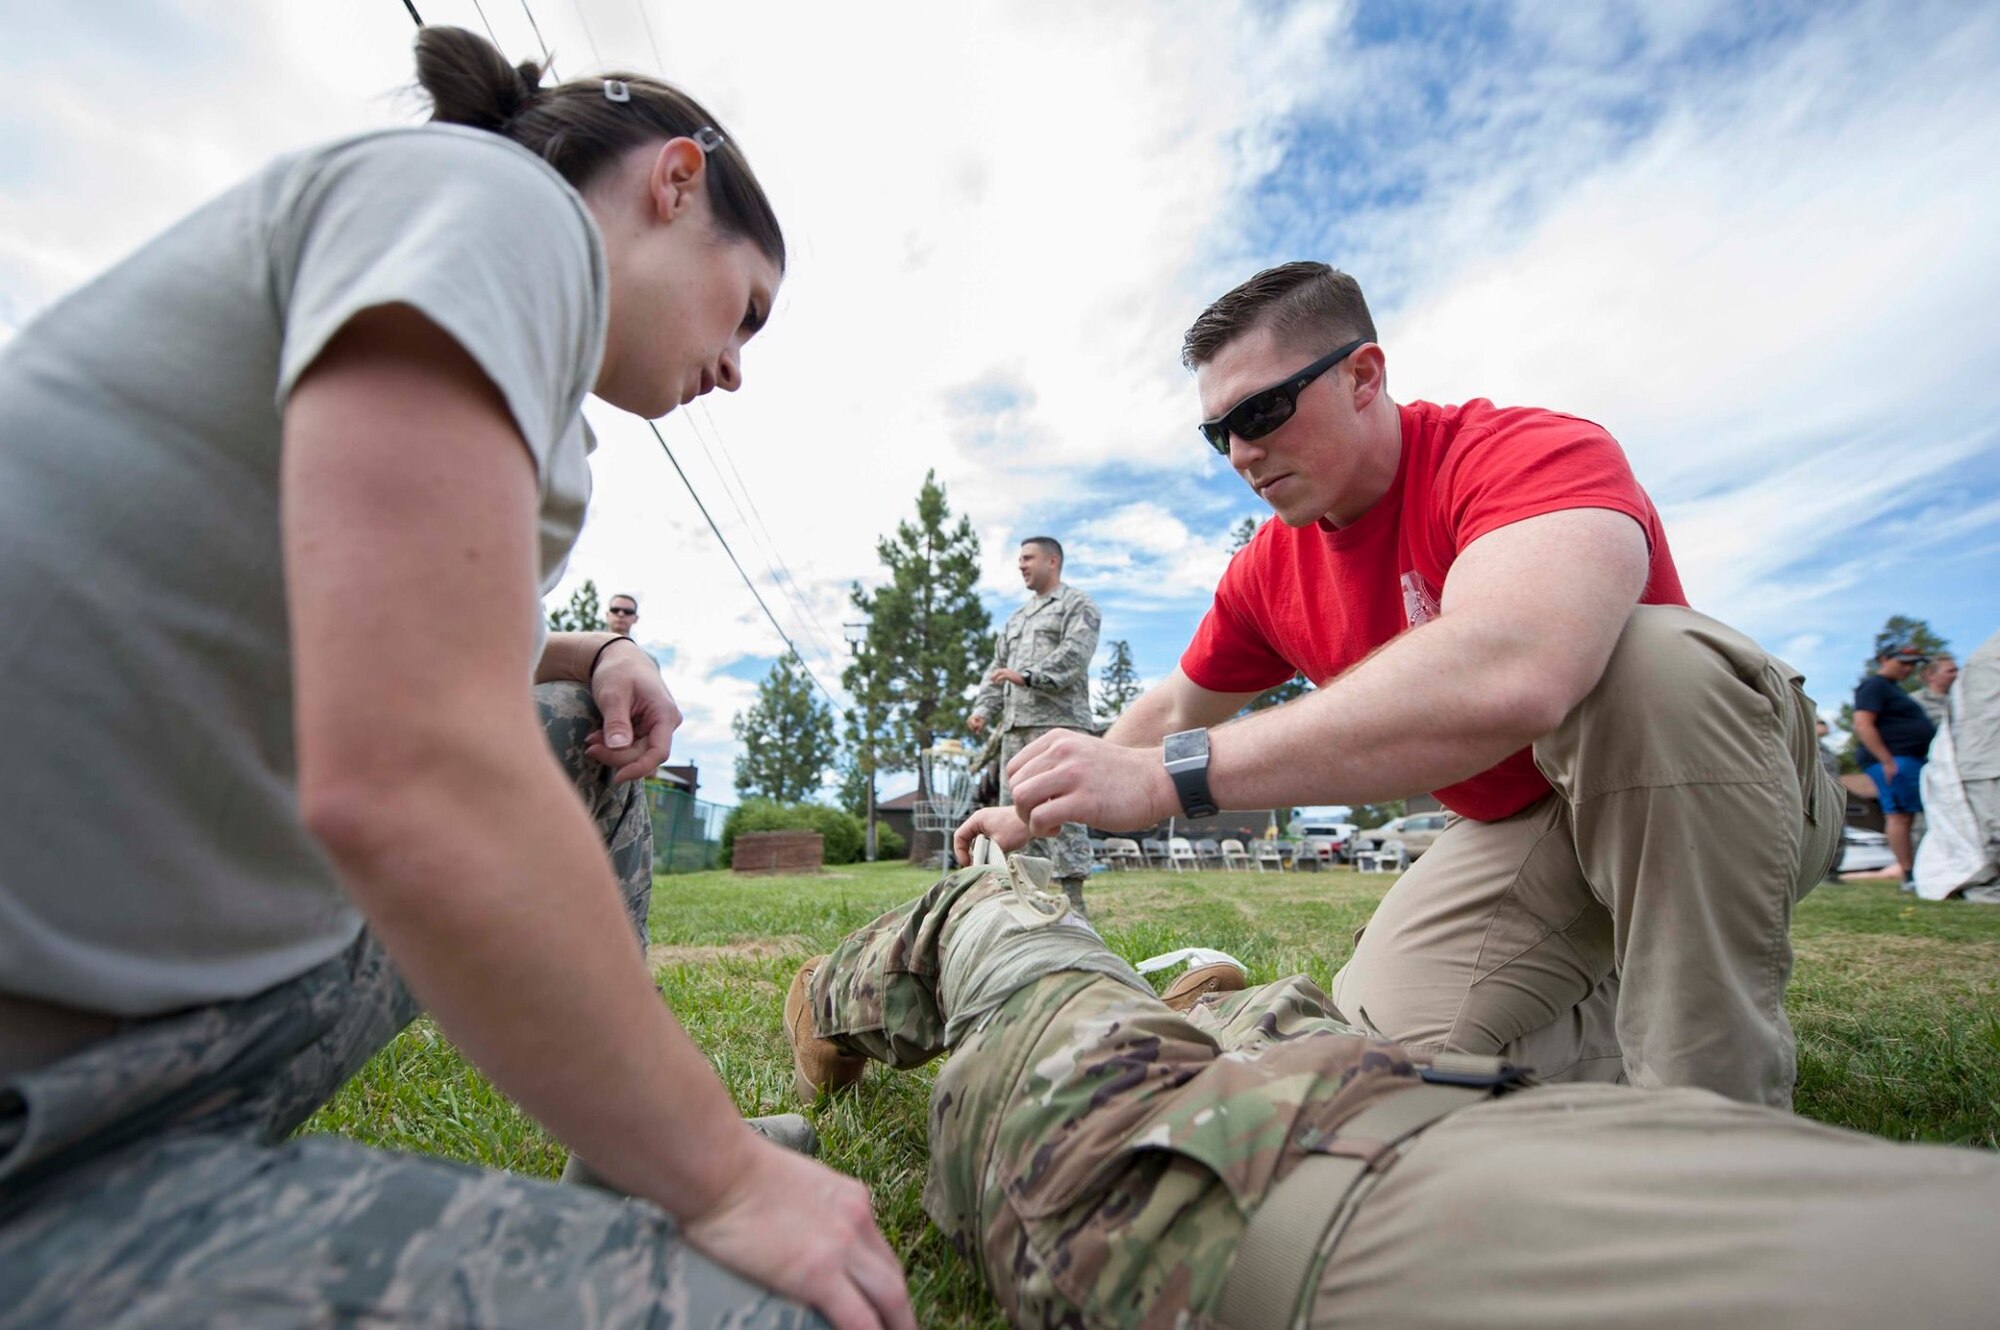 Staff Sgt Alisha Ayon, a medical technician assigned to the 149th Medical Group, receives an evaluation of her skills applying a combat bandage by Senior Airman Josh Adams a, medical technician assigned to the 152nd Medical Group, during Tactical Combat Casualty Care training at Coast Guard Station Lake Tahoe, Nevada, June 16.